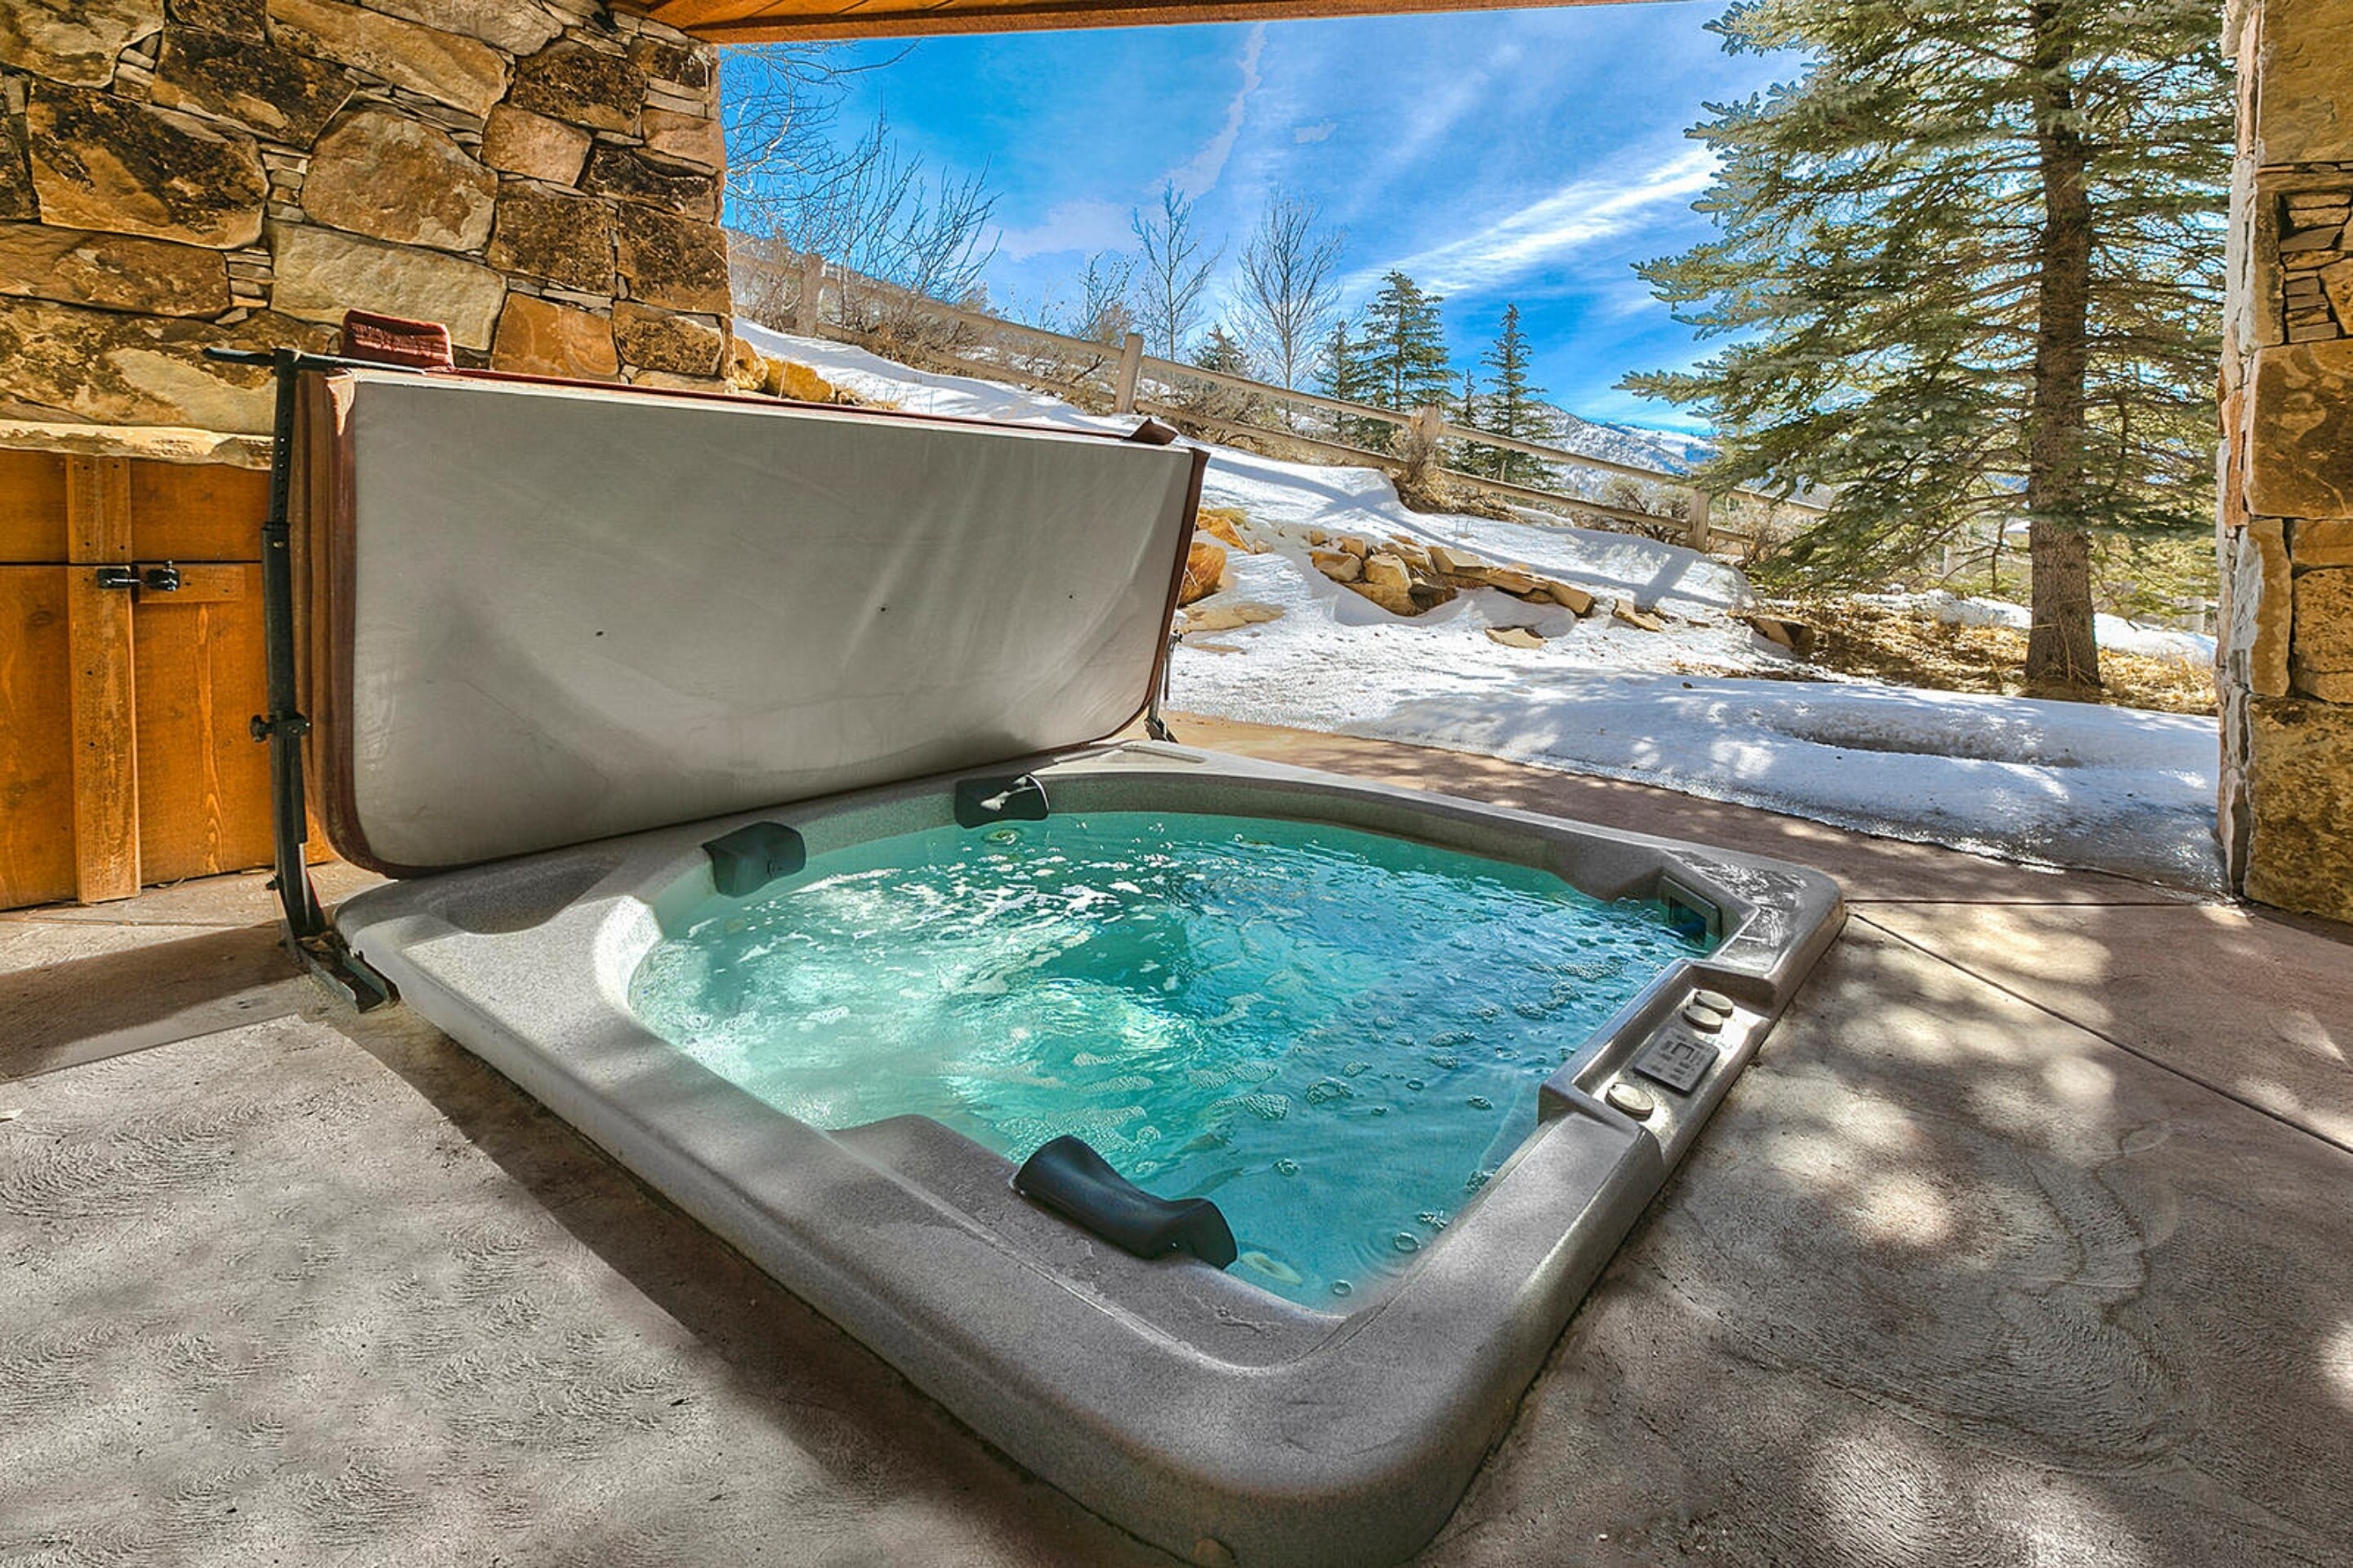 Hot tub's ready after a day on the slopes.